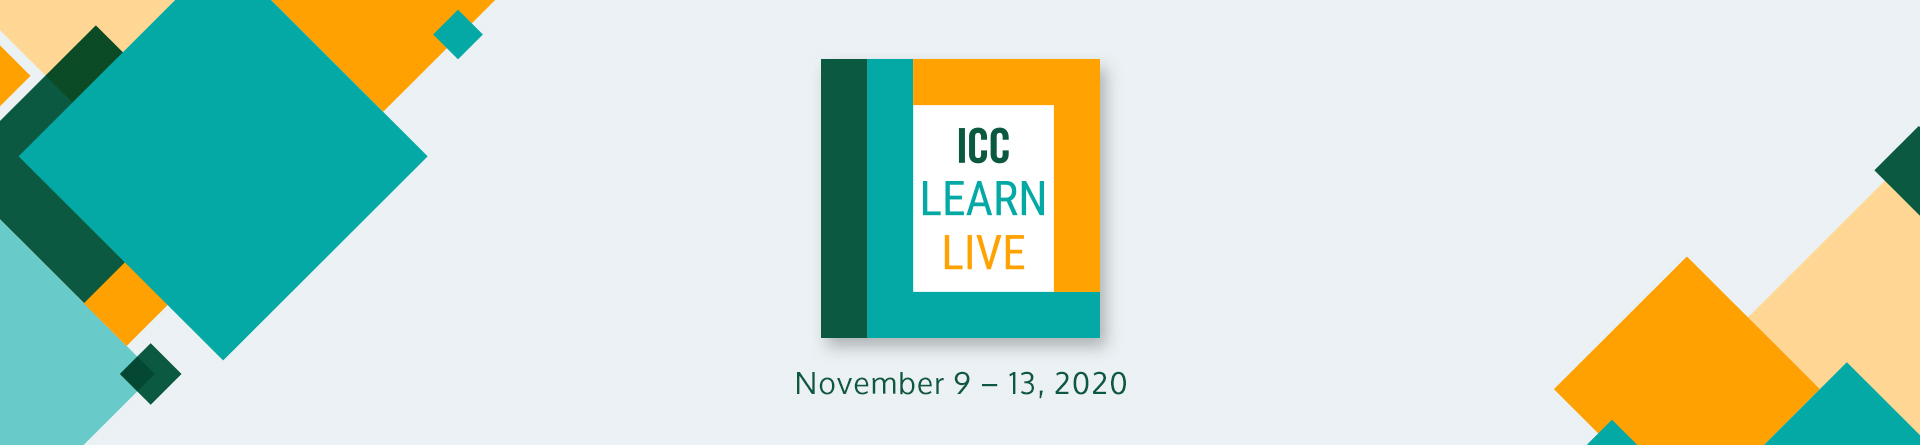 ICC Learn Live Schedule/Resources